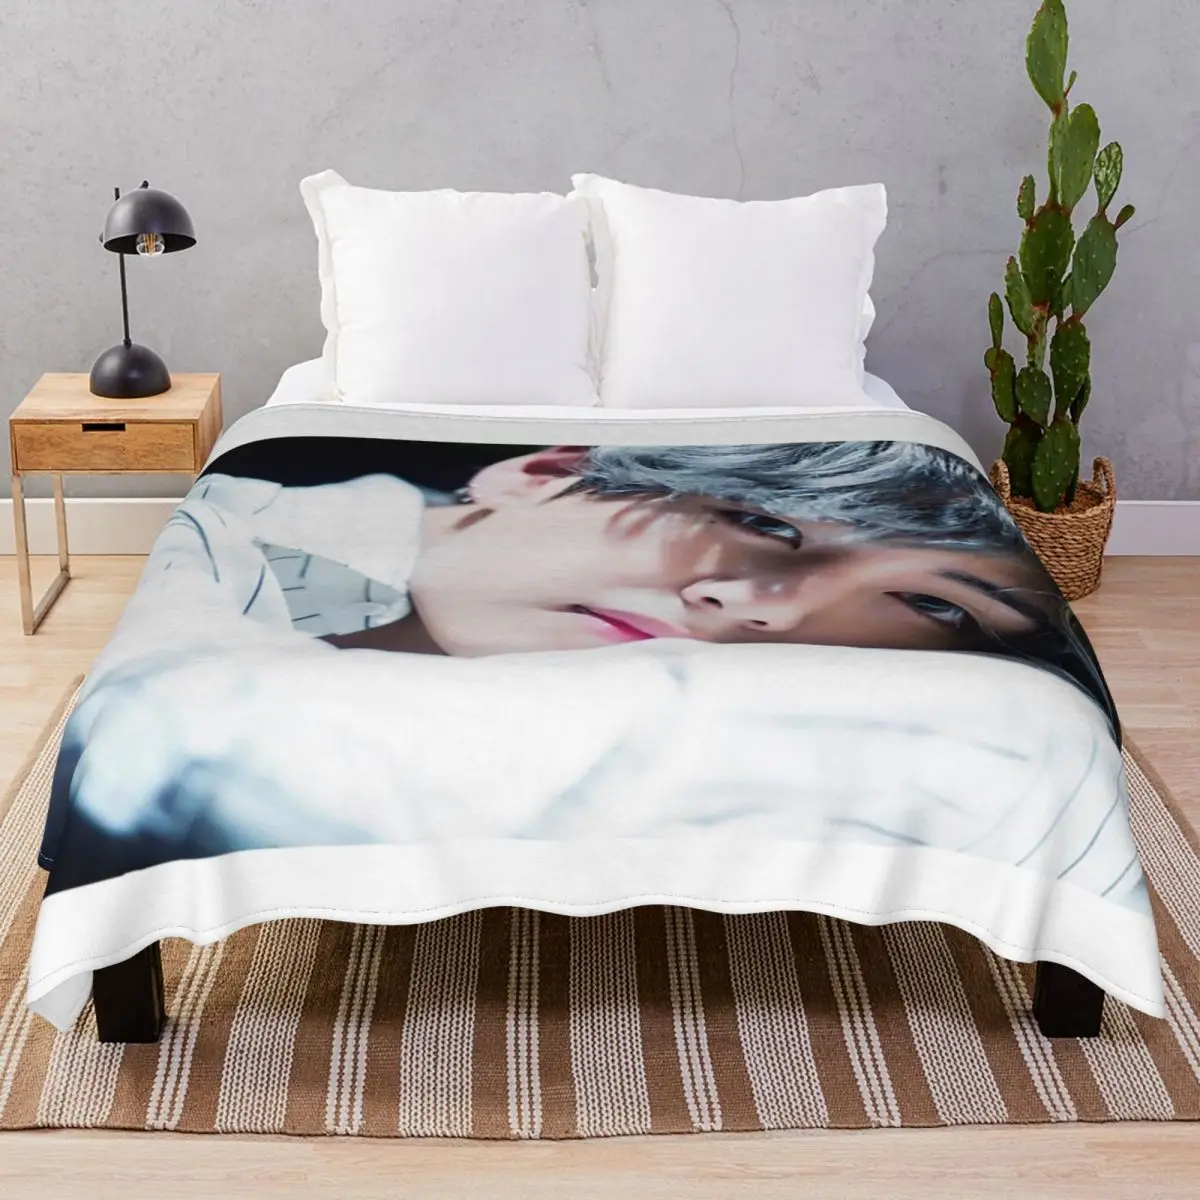 Taehyung Blankets Flannel Printed Soft Throw Blanket for Bedding Sofa Camp Office